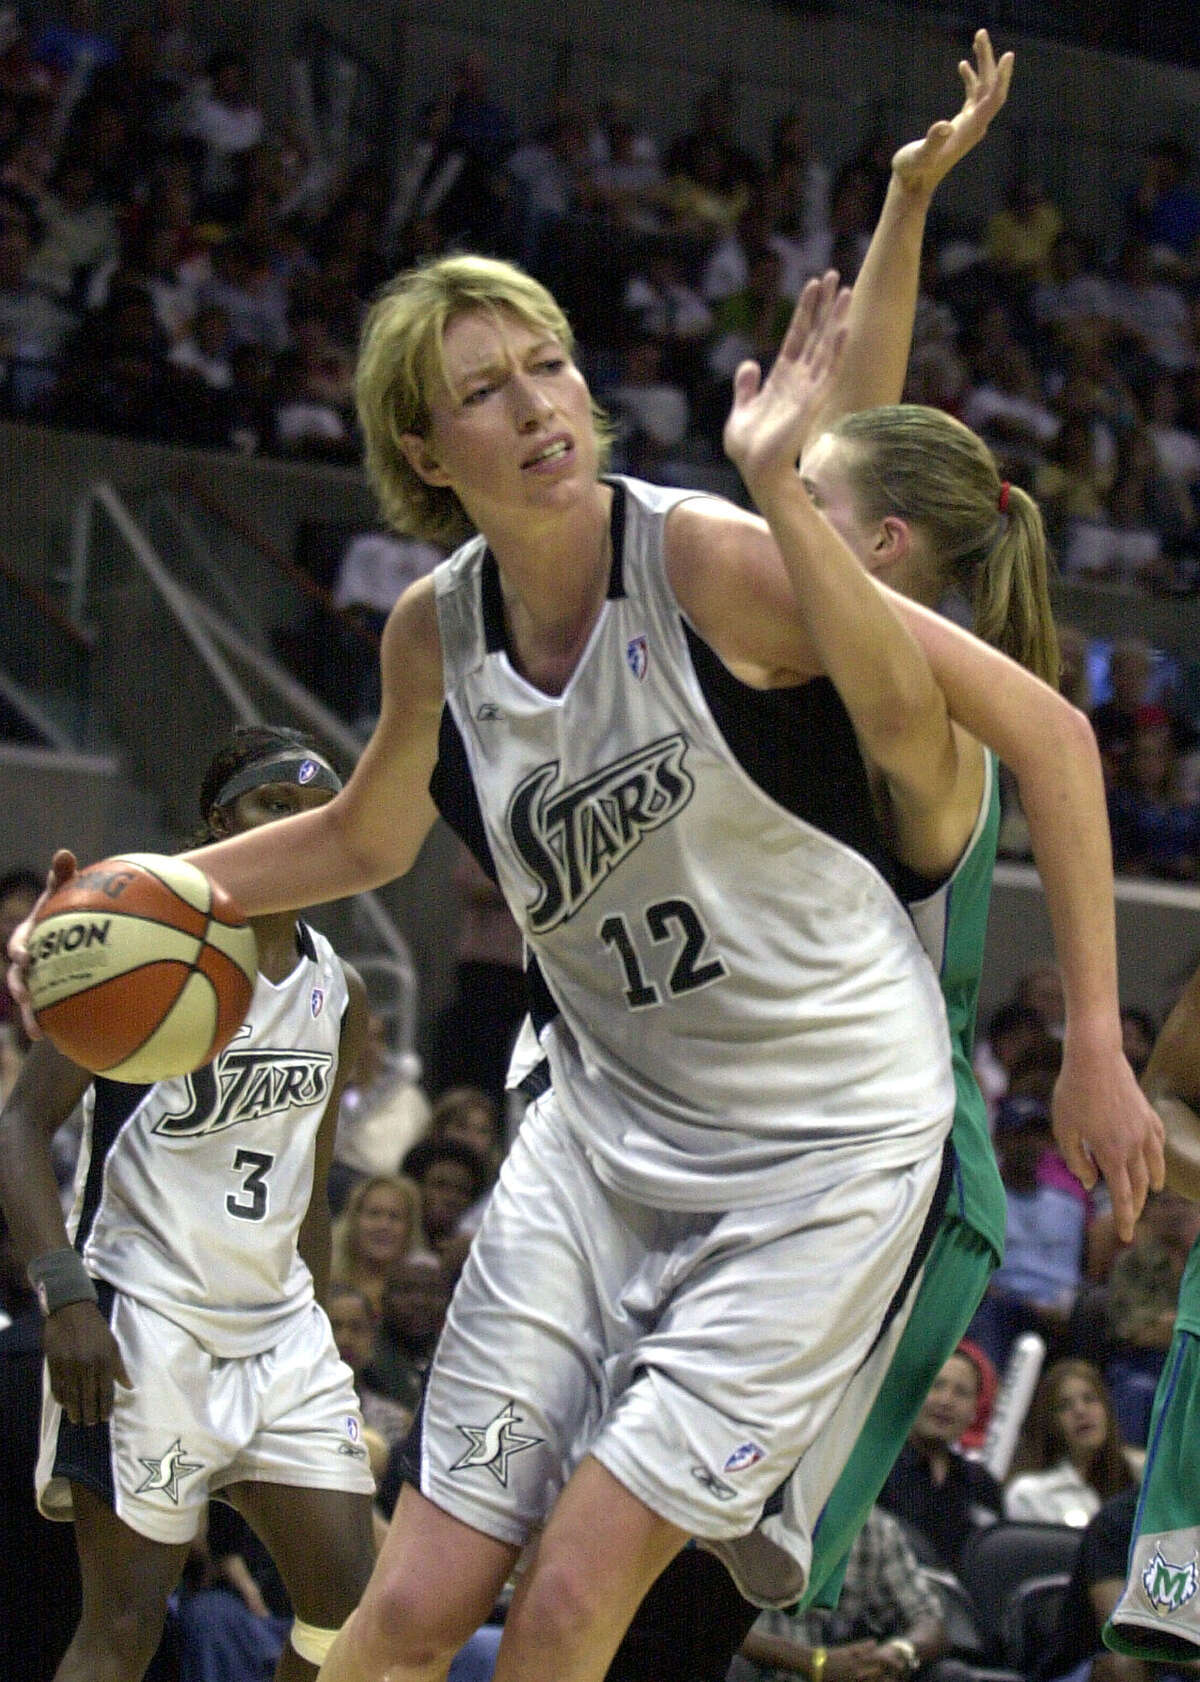 Former San Antonio Silver Stars player Margo Dydek (12) passed under Michele Van Gorp in 2003. She holds the Guinness World Record for most career blocks in the WNBA.